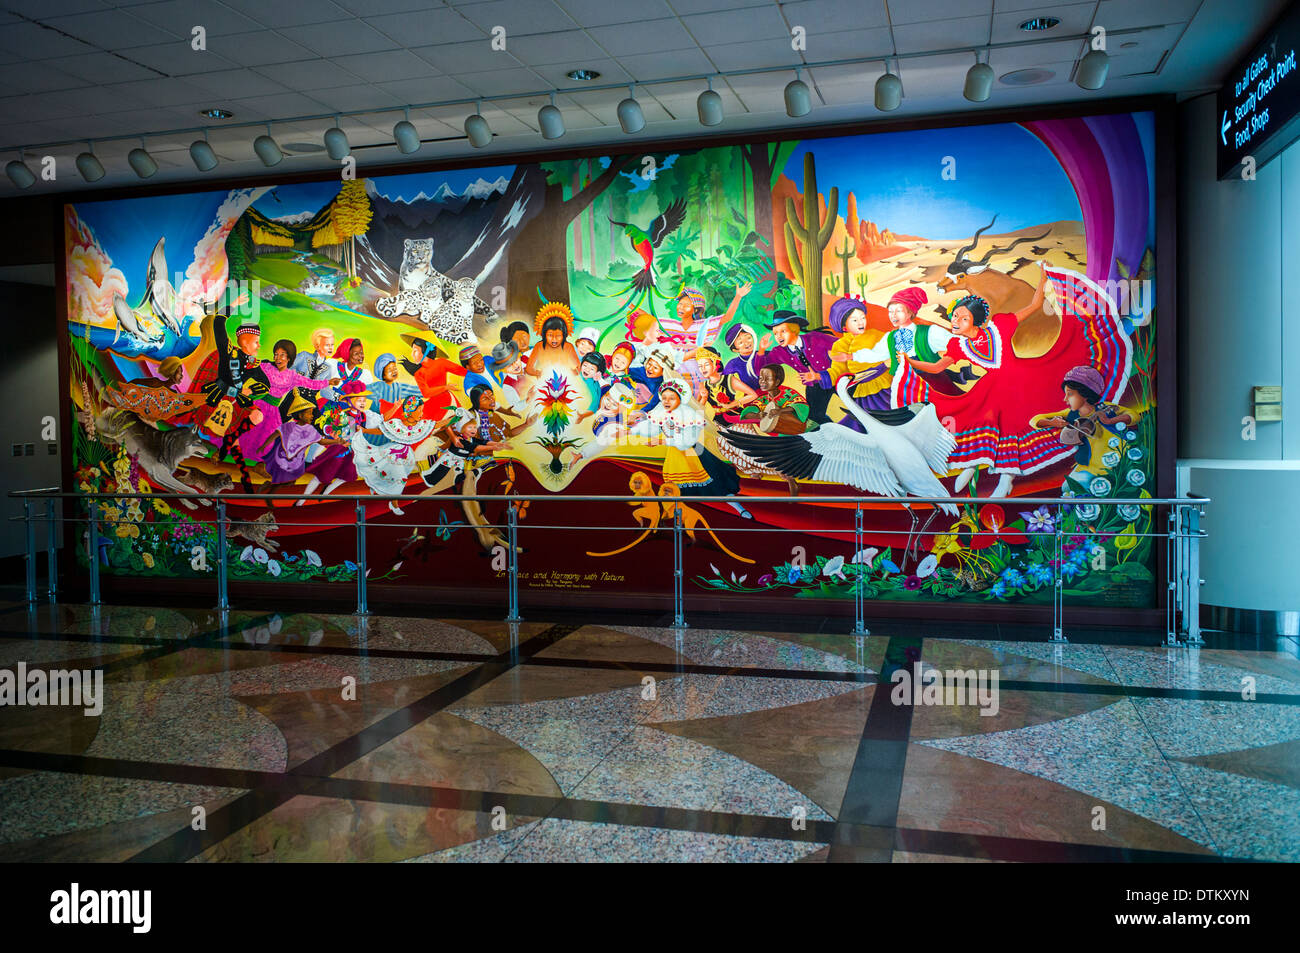 Colorful mural titled 'In Peace & Harmony with Nature', by Leo Tanguma, Denver International Airport, Colorado, USA Stock Photo